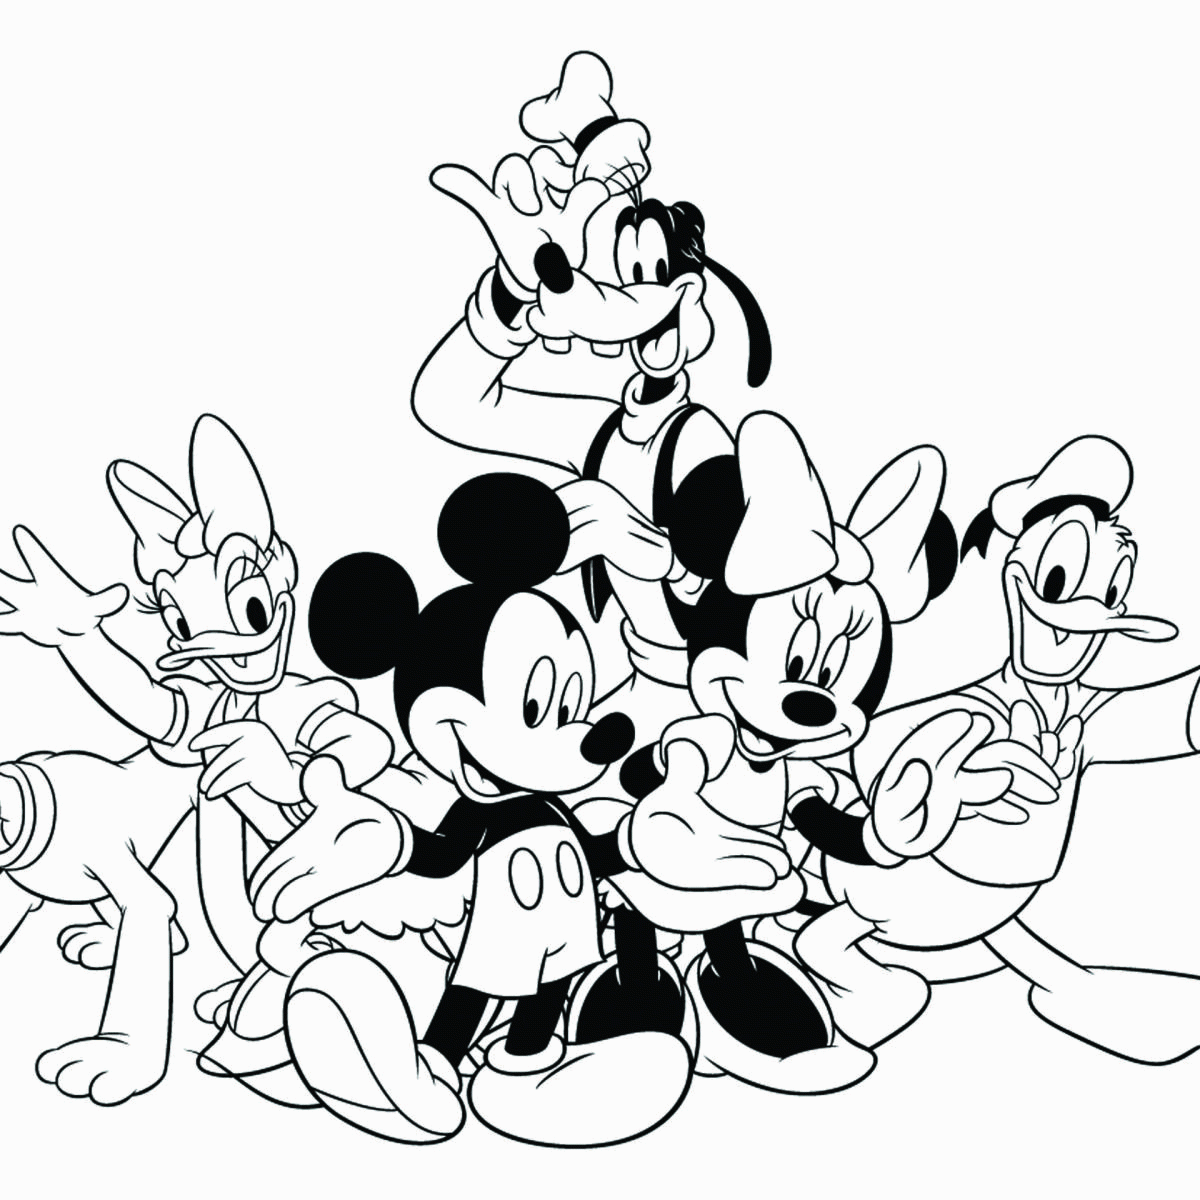 Disney Mickey's Typing Adventure Coloring Page | Disney Family